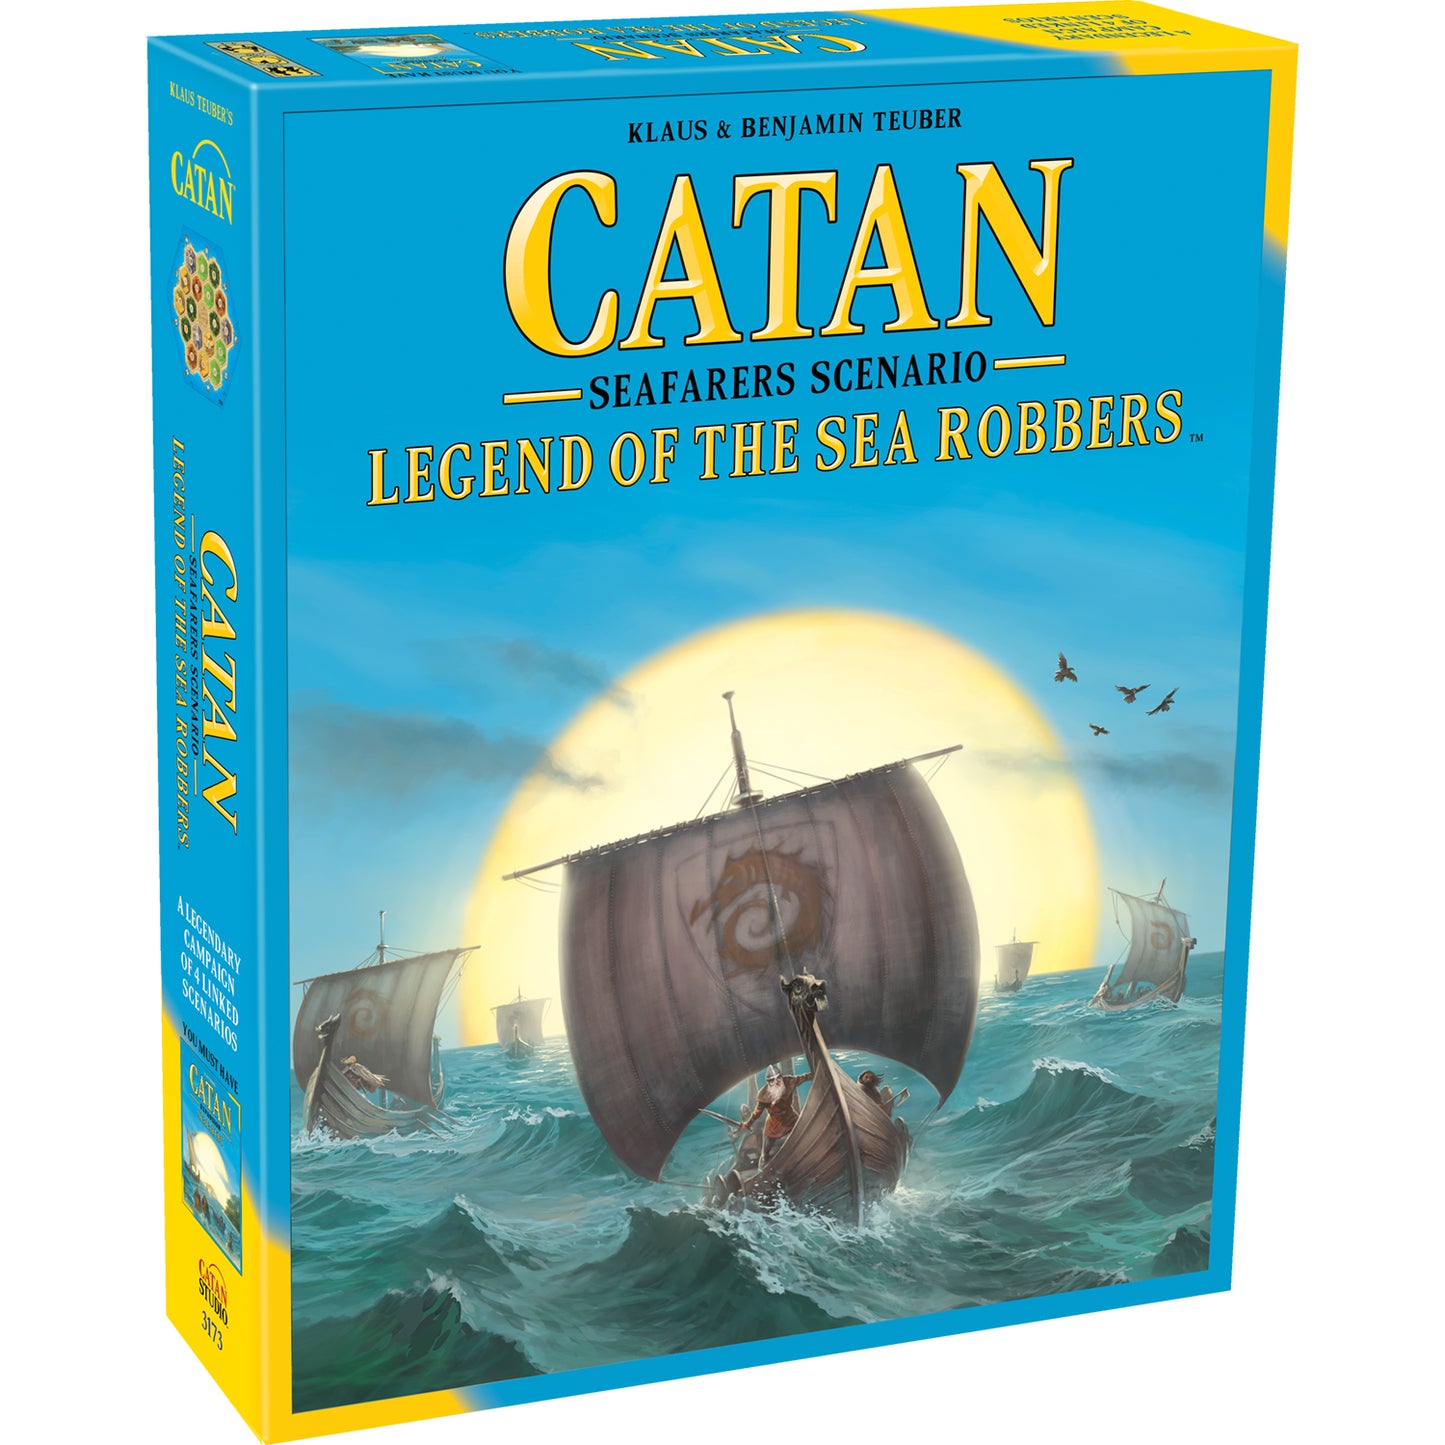 Catan Legend of The Sea Robbers